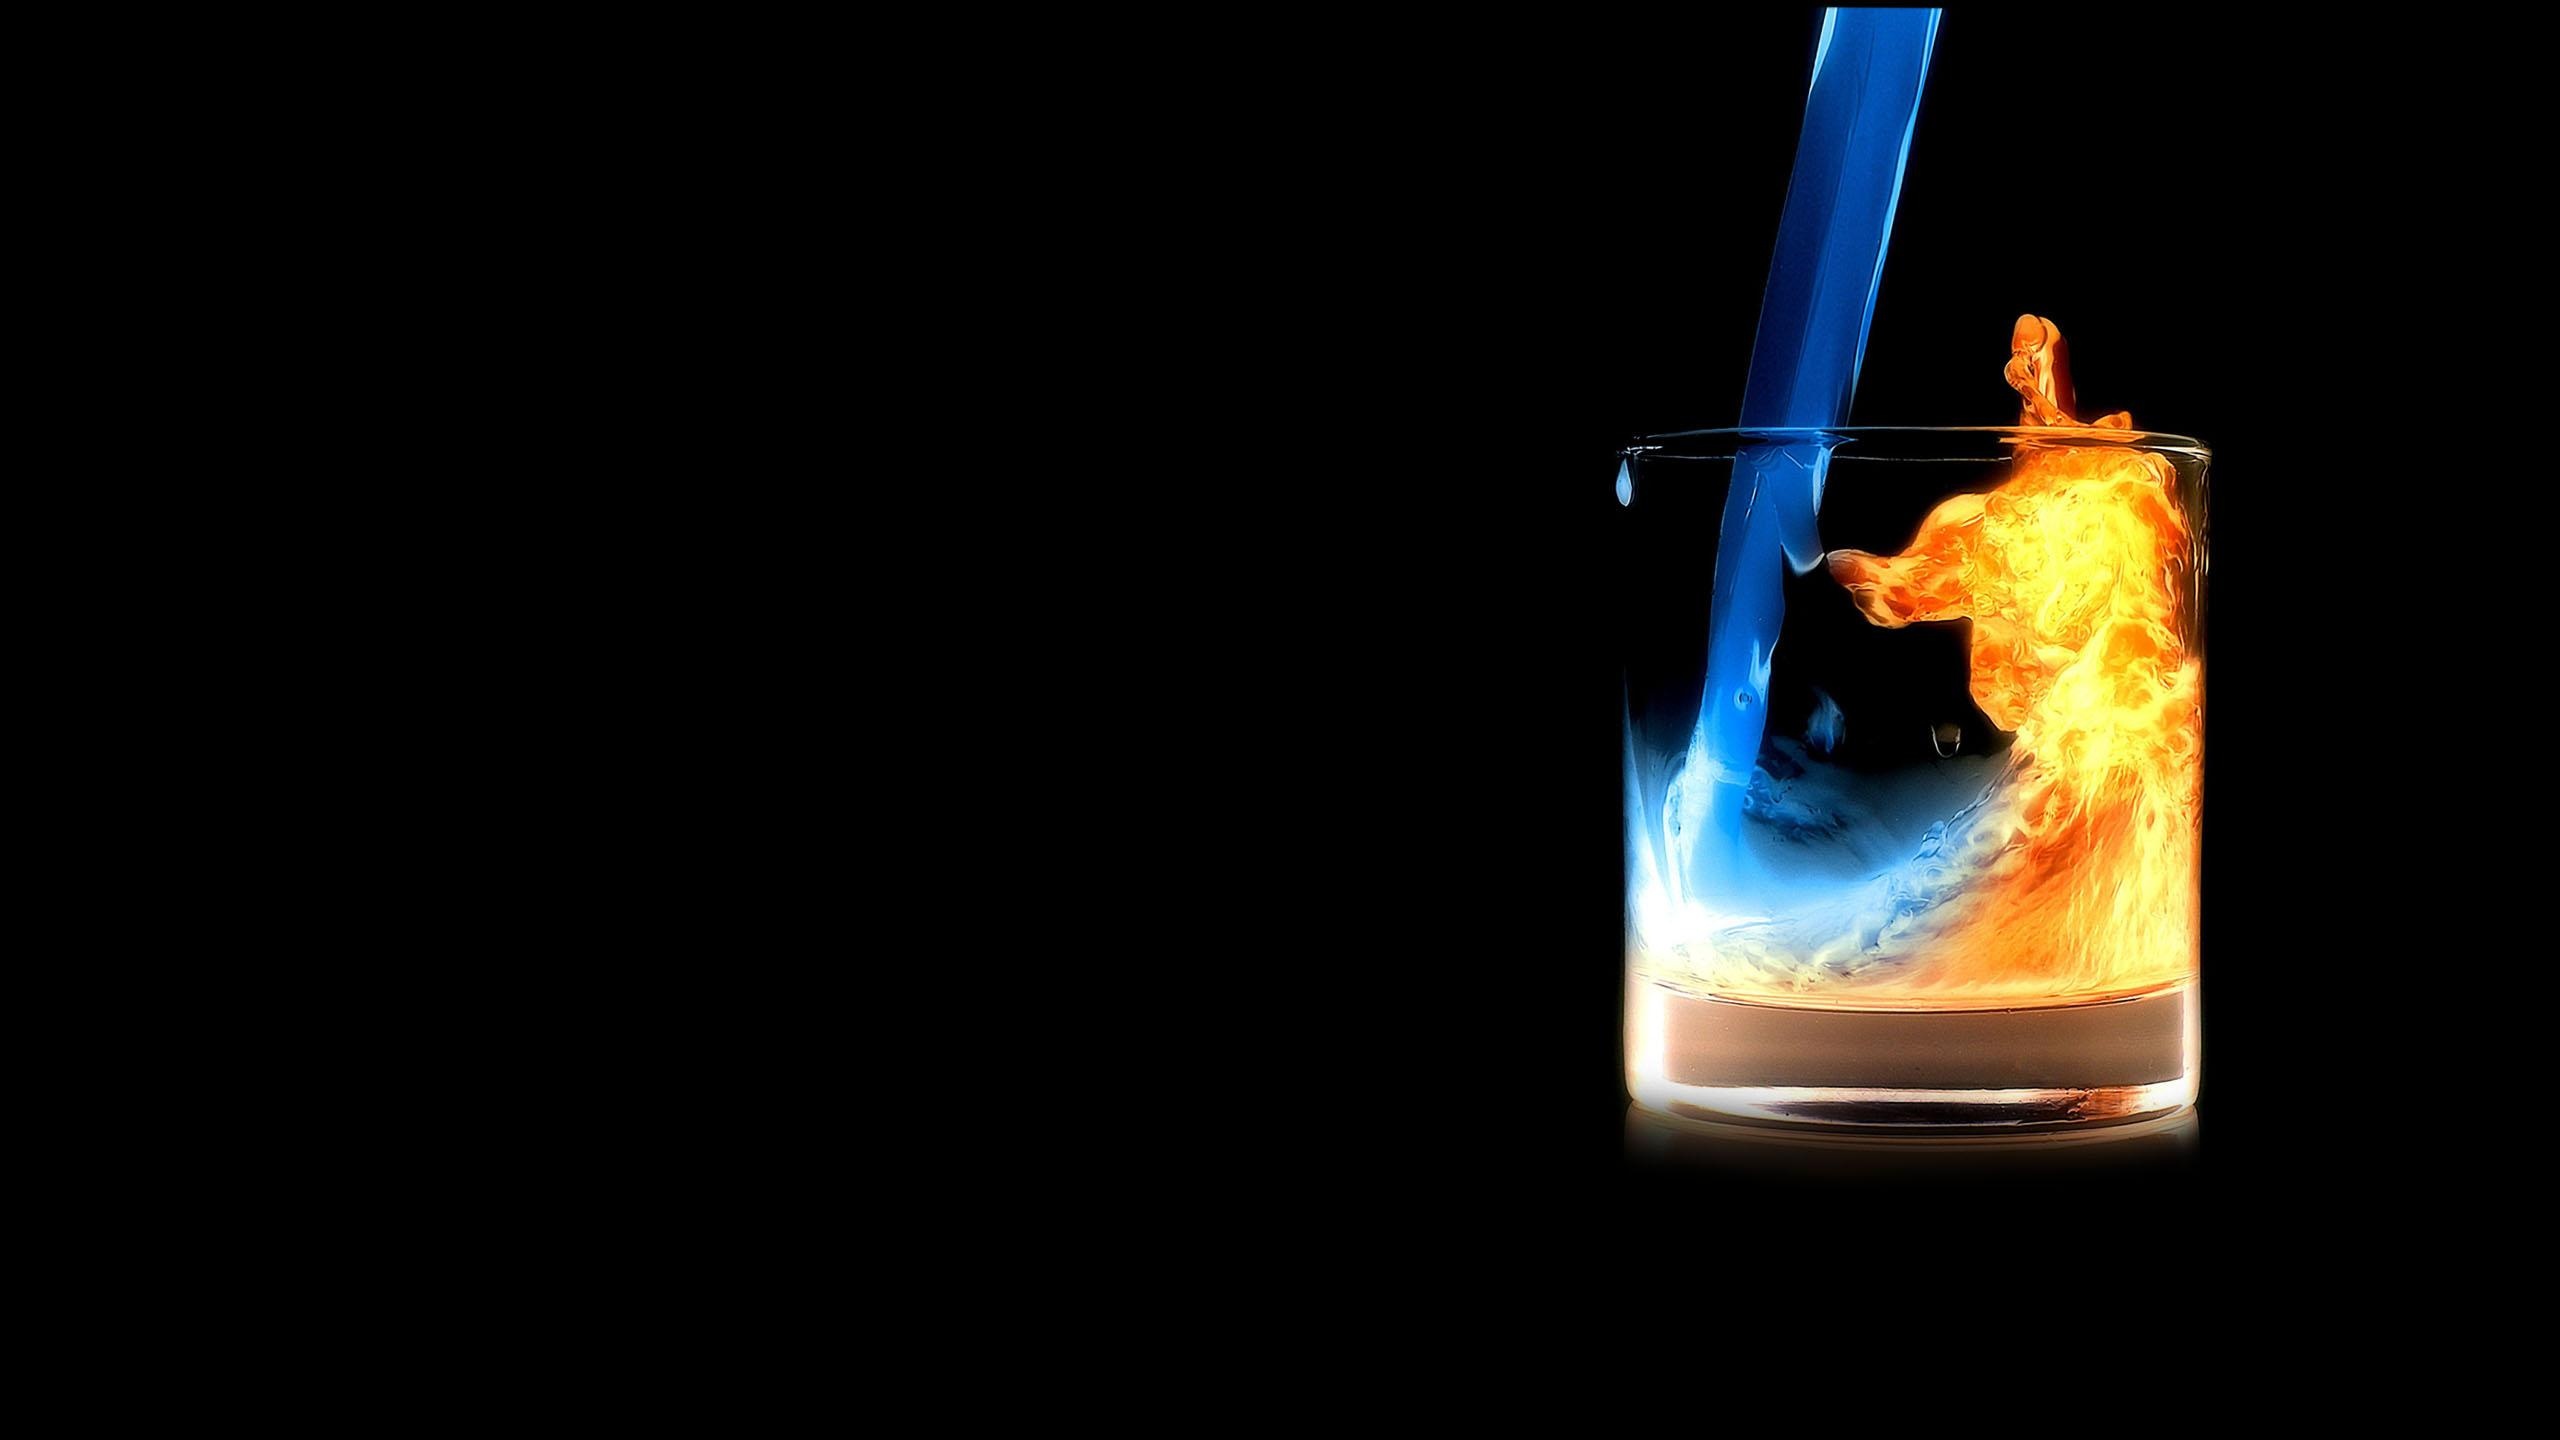 Fire water in glass, Sony Xperia XXZZ5 Premium HD wallpapers, Flame in glass visuals, Flame images, Fire wallpaper backgrounds, 2560x1440 HD Desktop